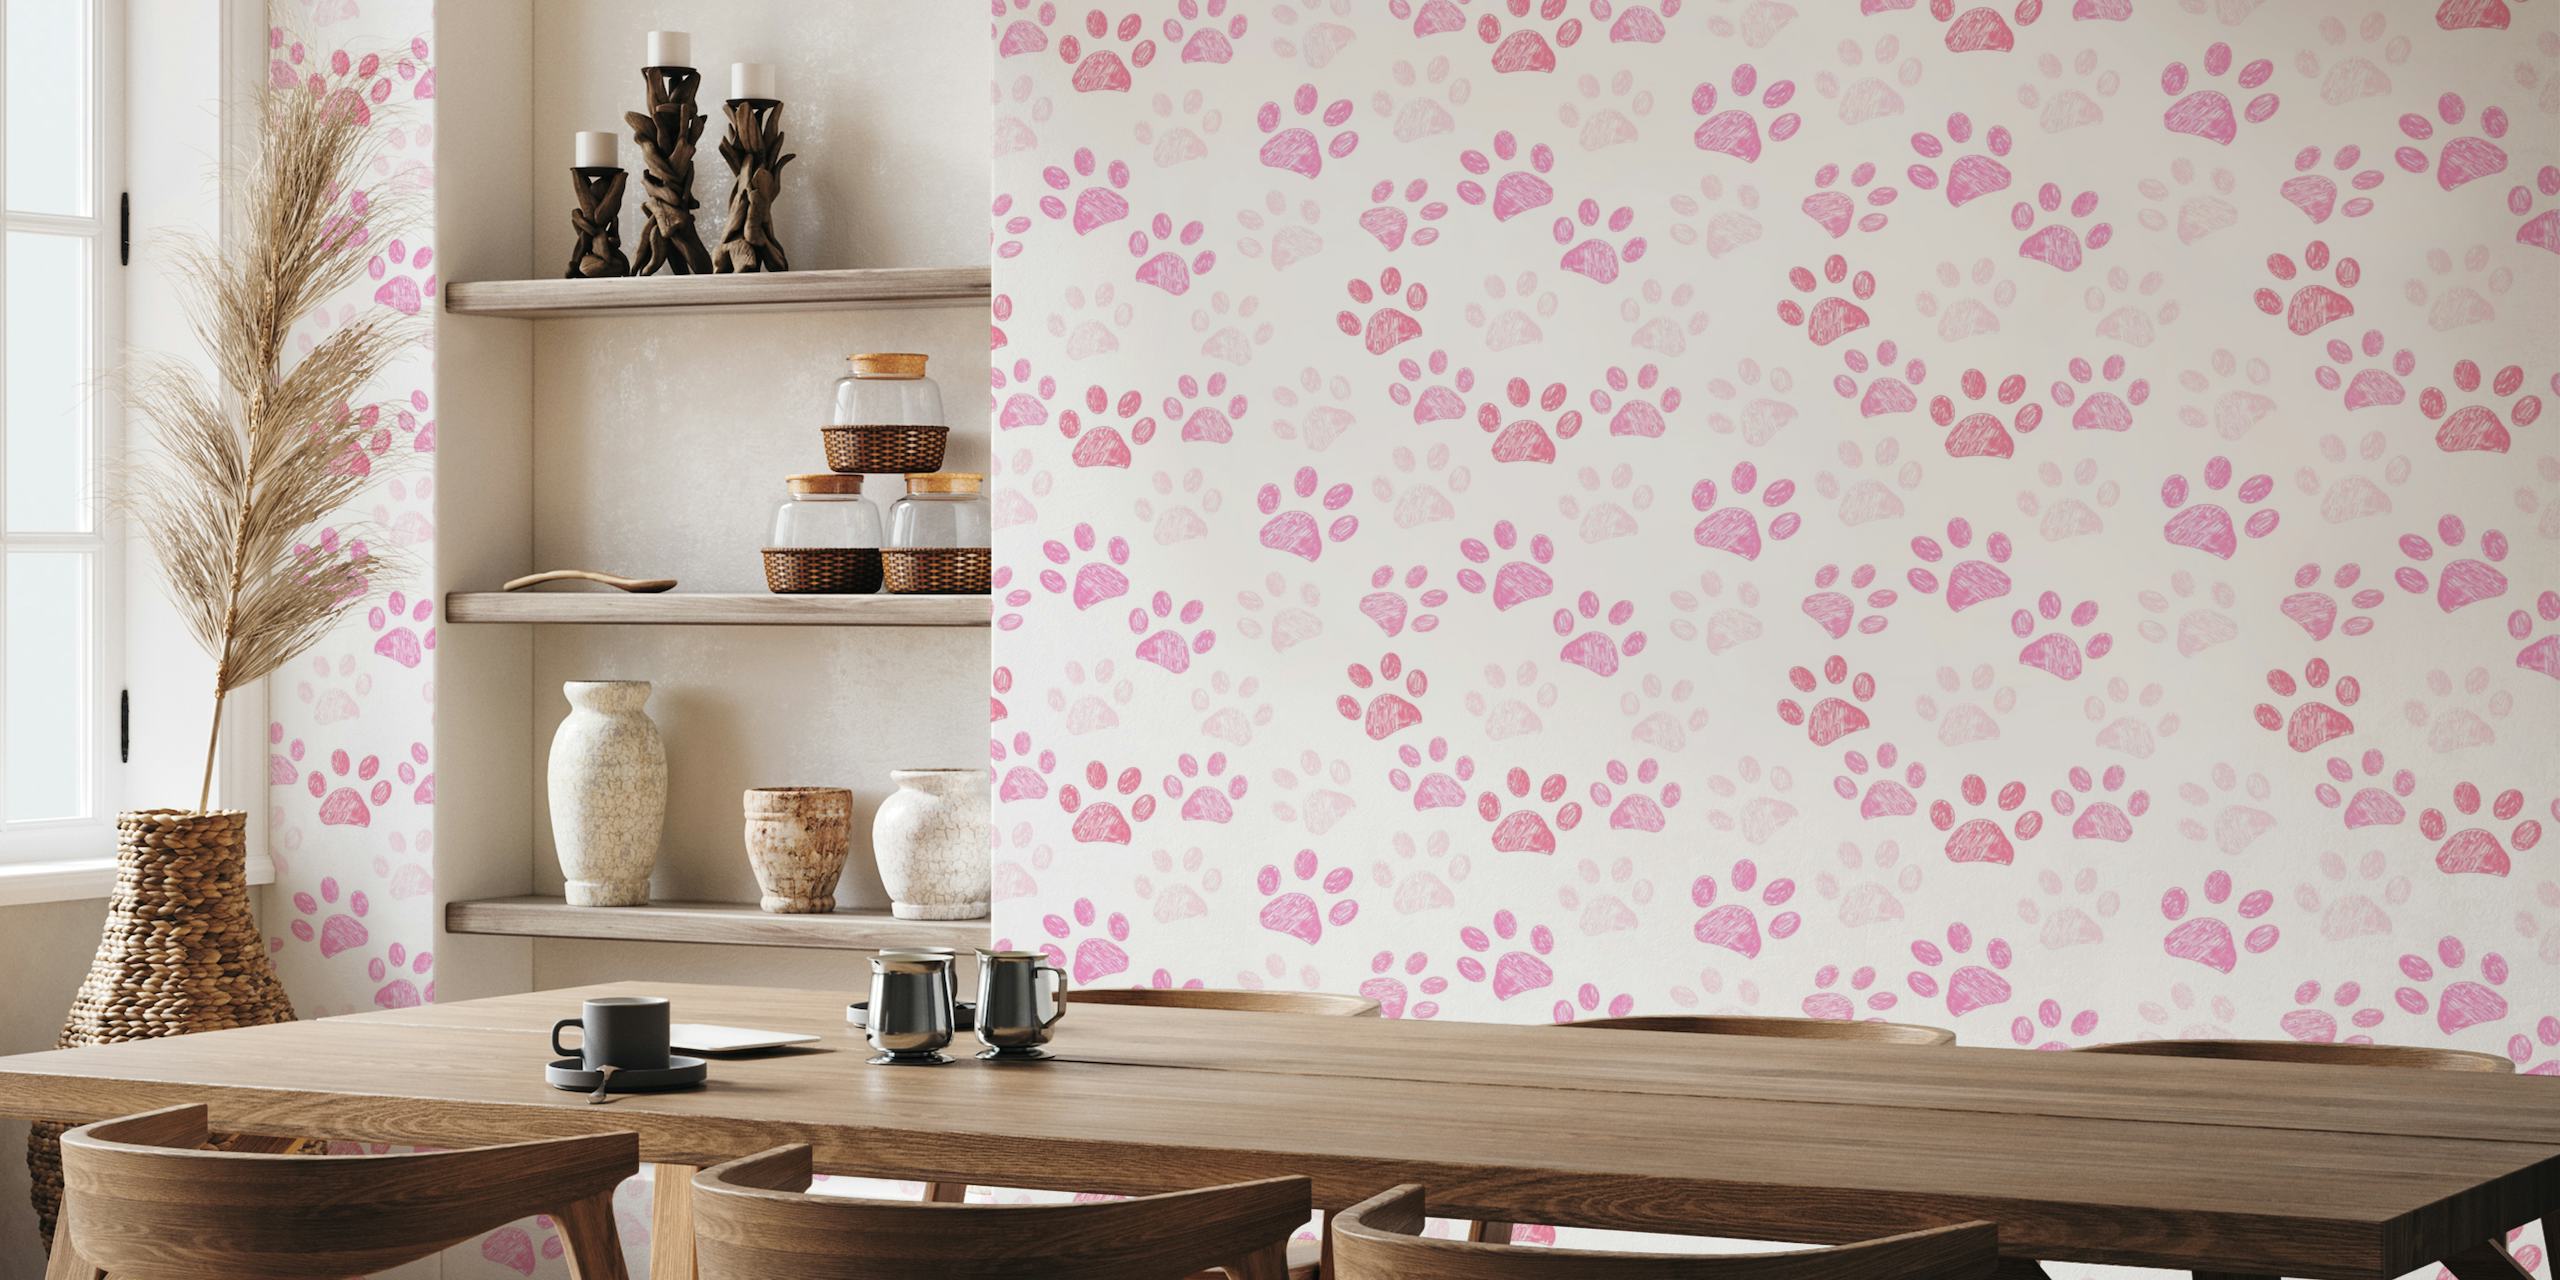 Pink paw prints wall mural with a variety of shades and sizes against a white background